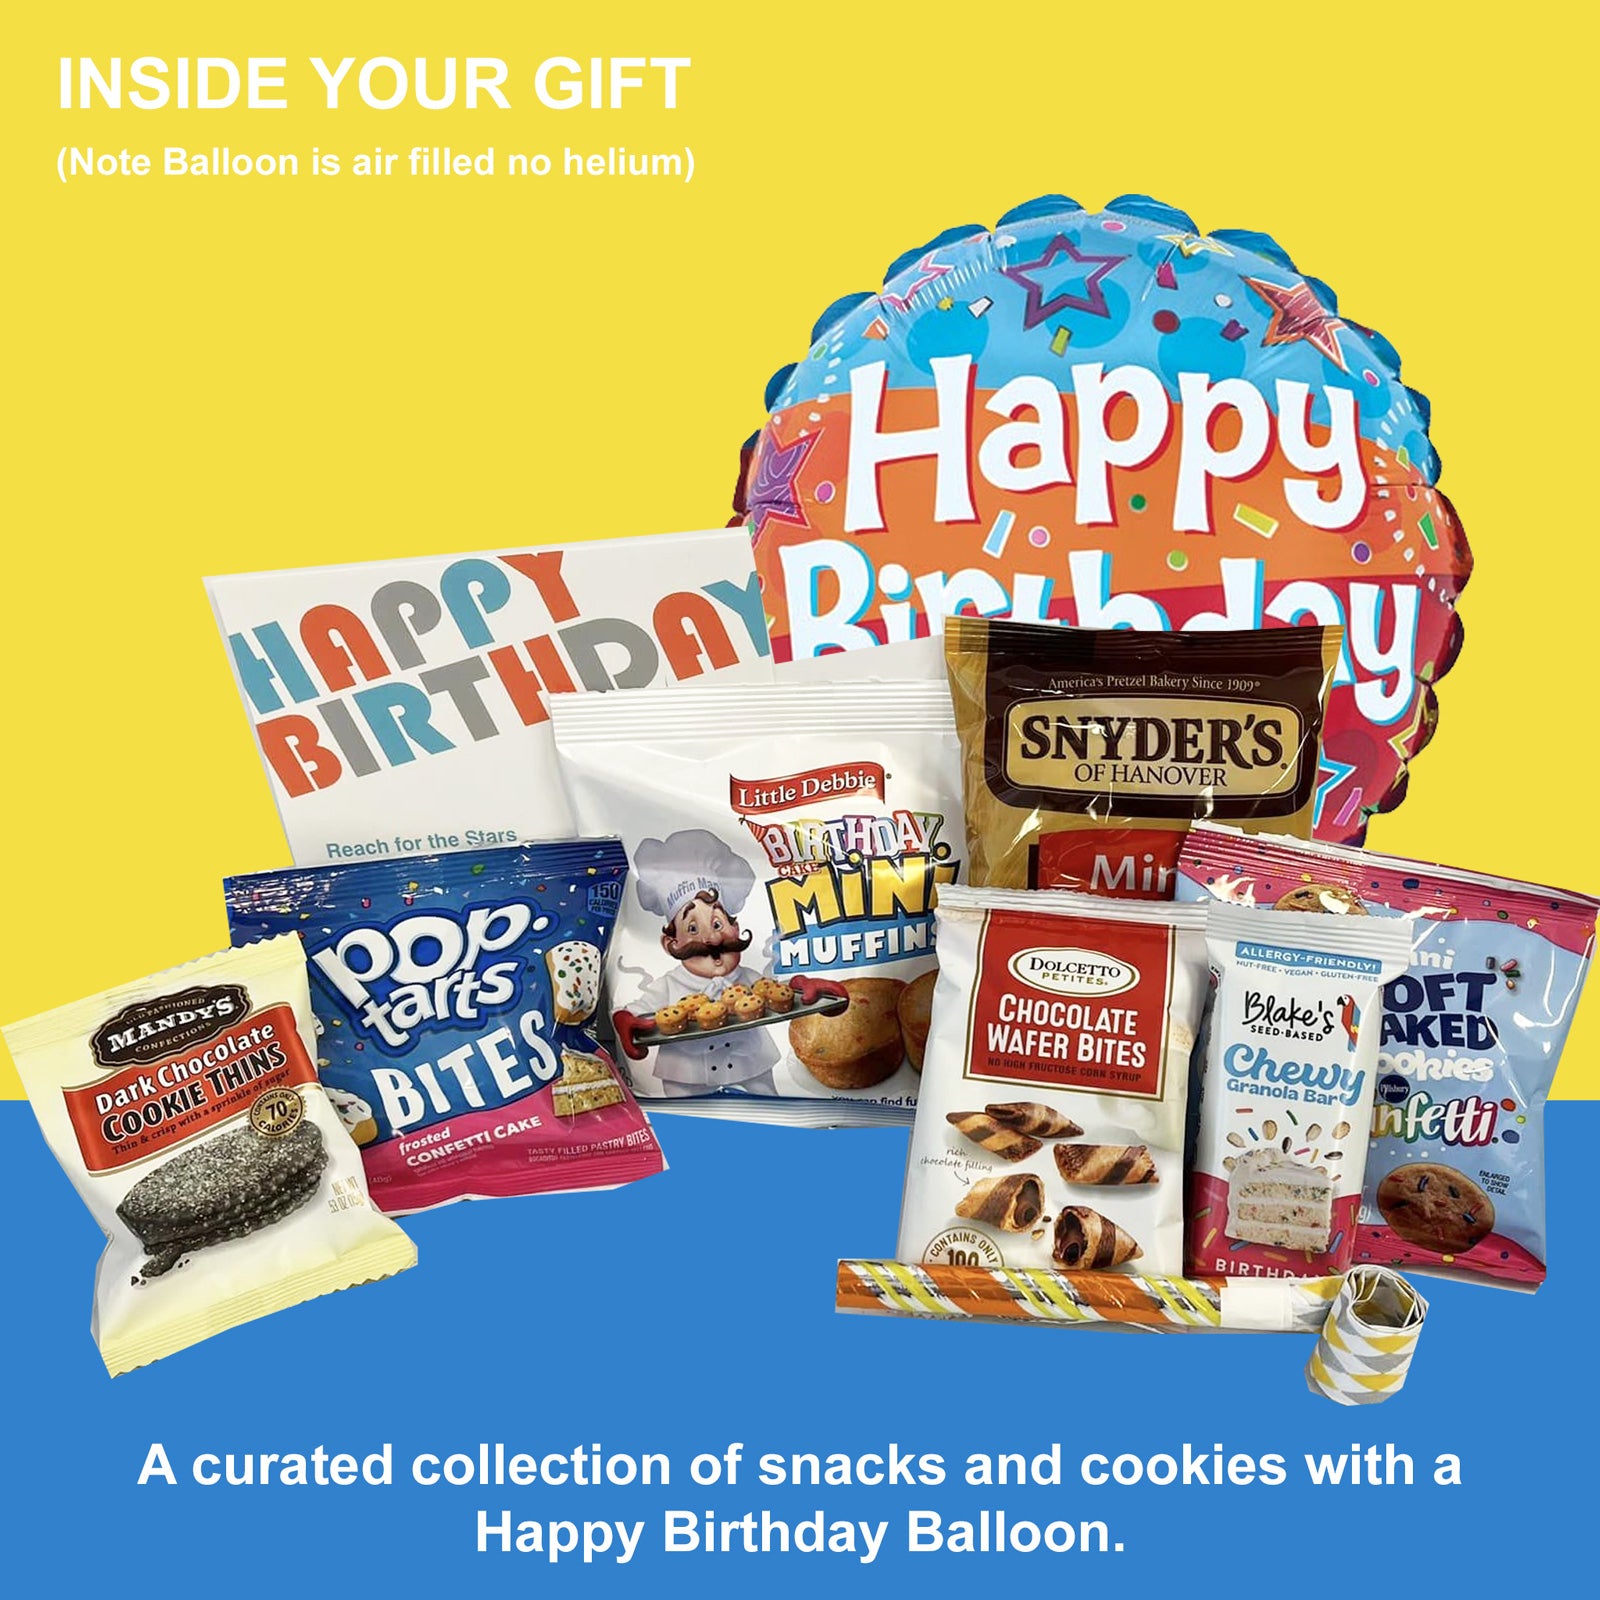 Birthday Care Package with Snacks and Balloon for All Ages, Unisex Design